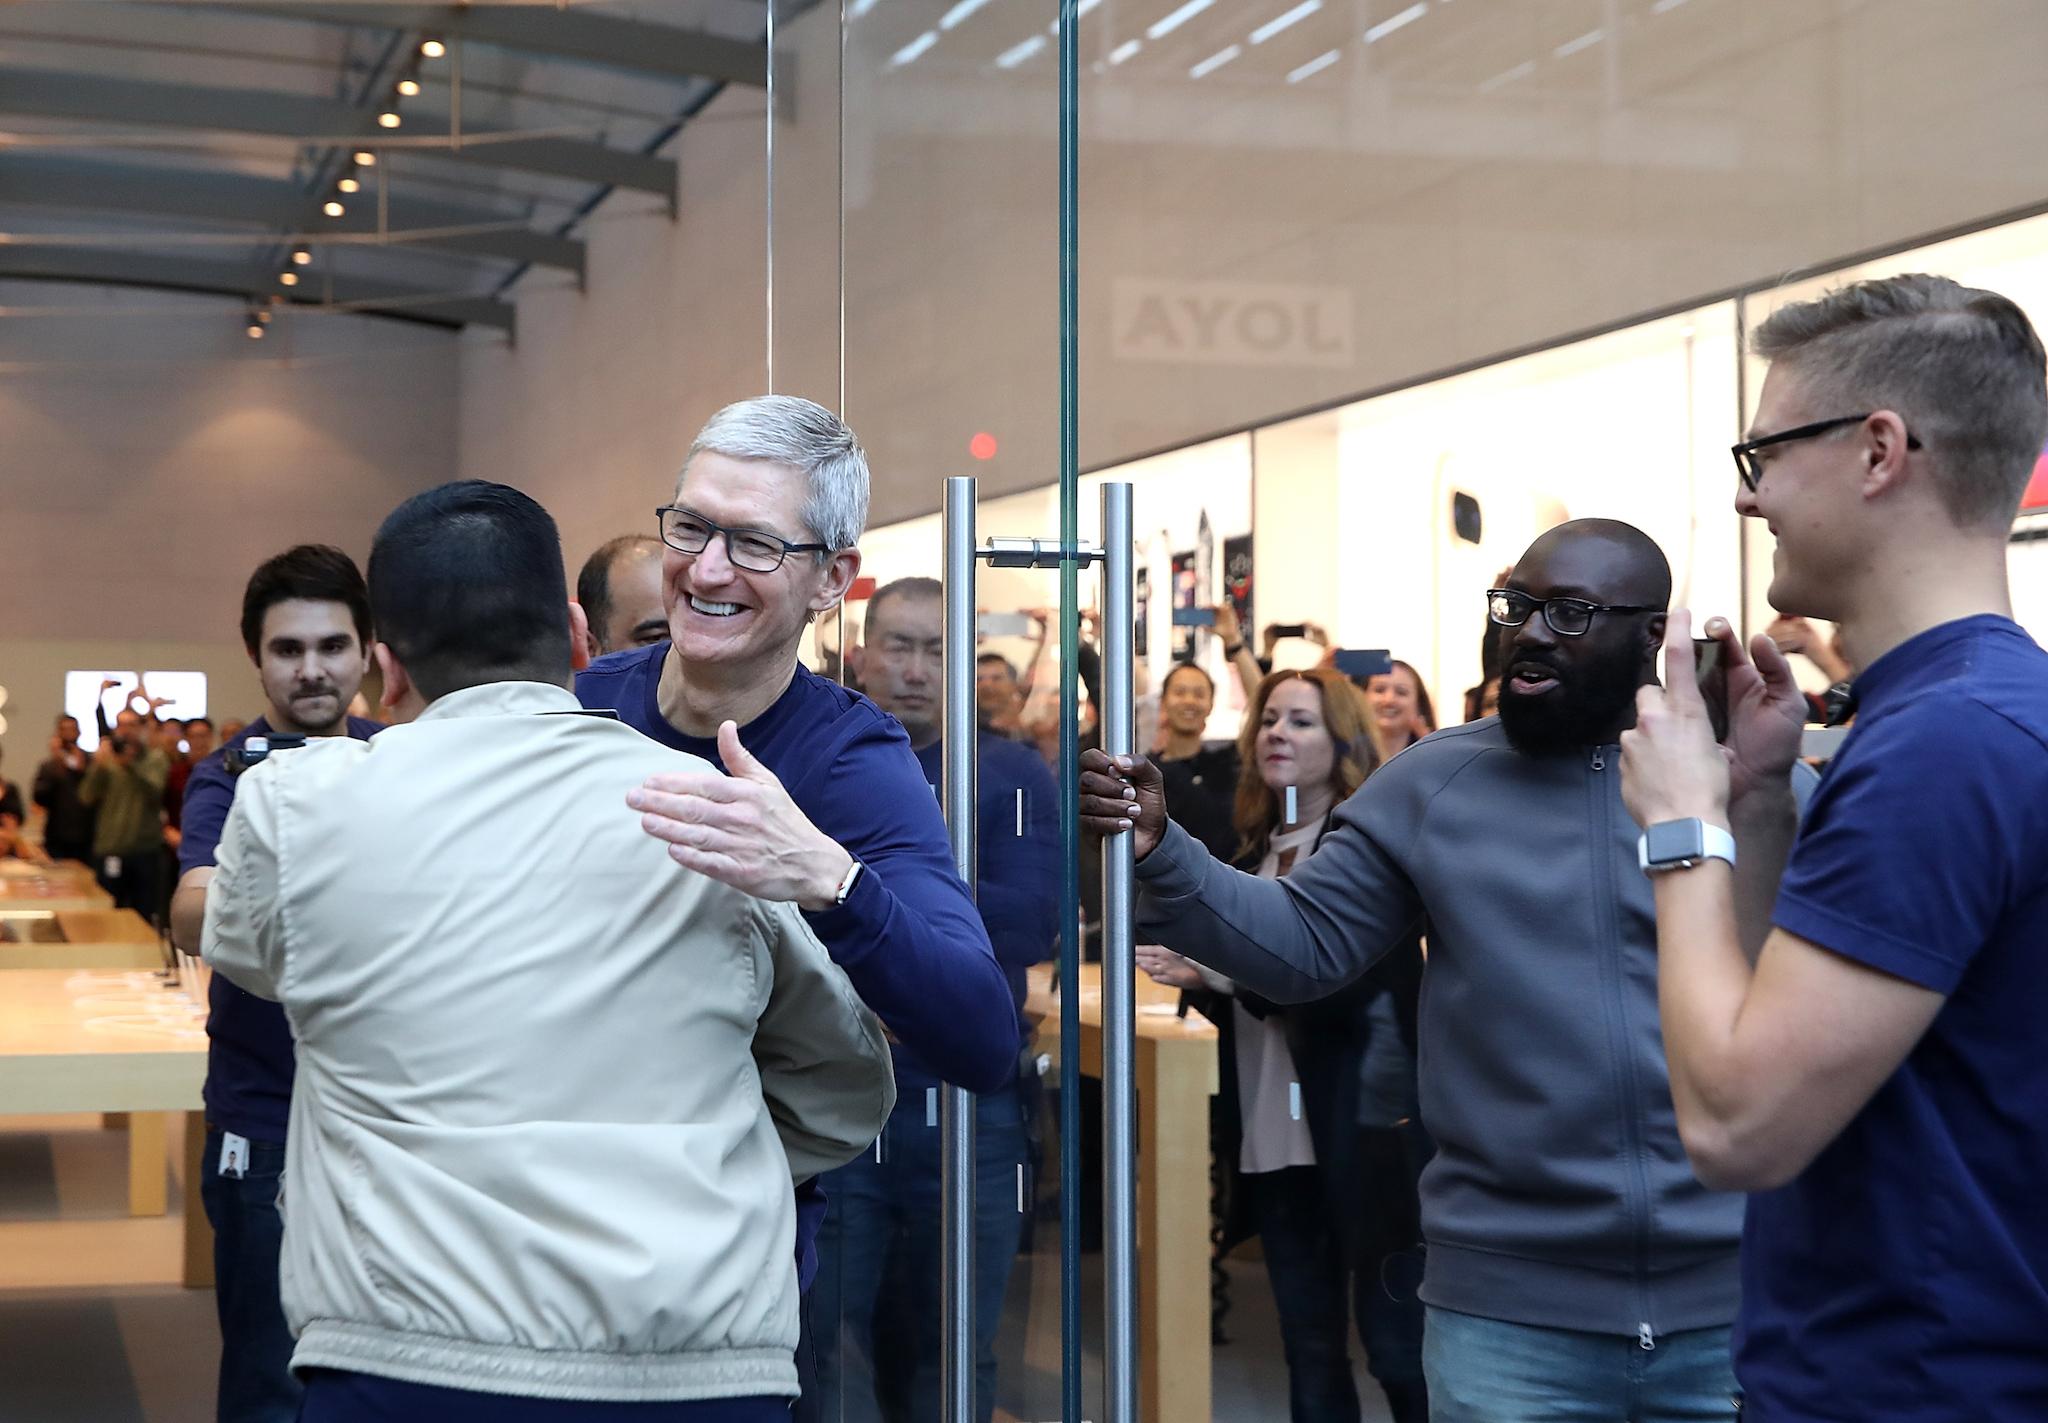 CEO Tim Cook greets customers as they prepare to purchase a new iPhone X in Palo Alto, California